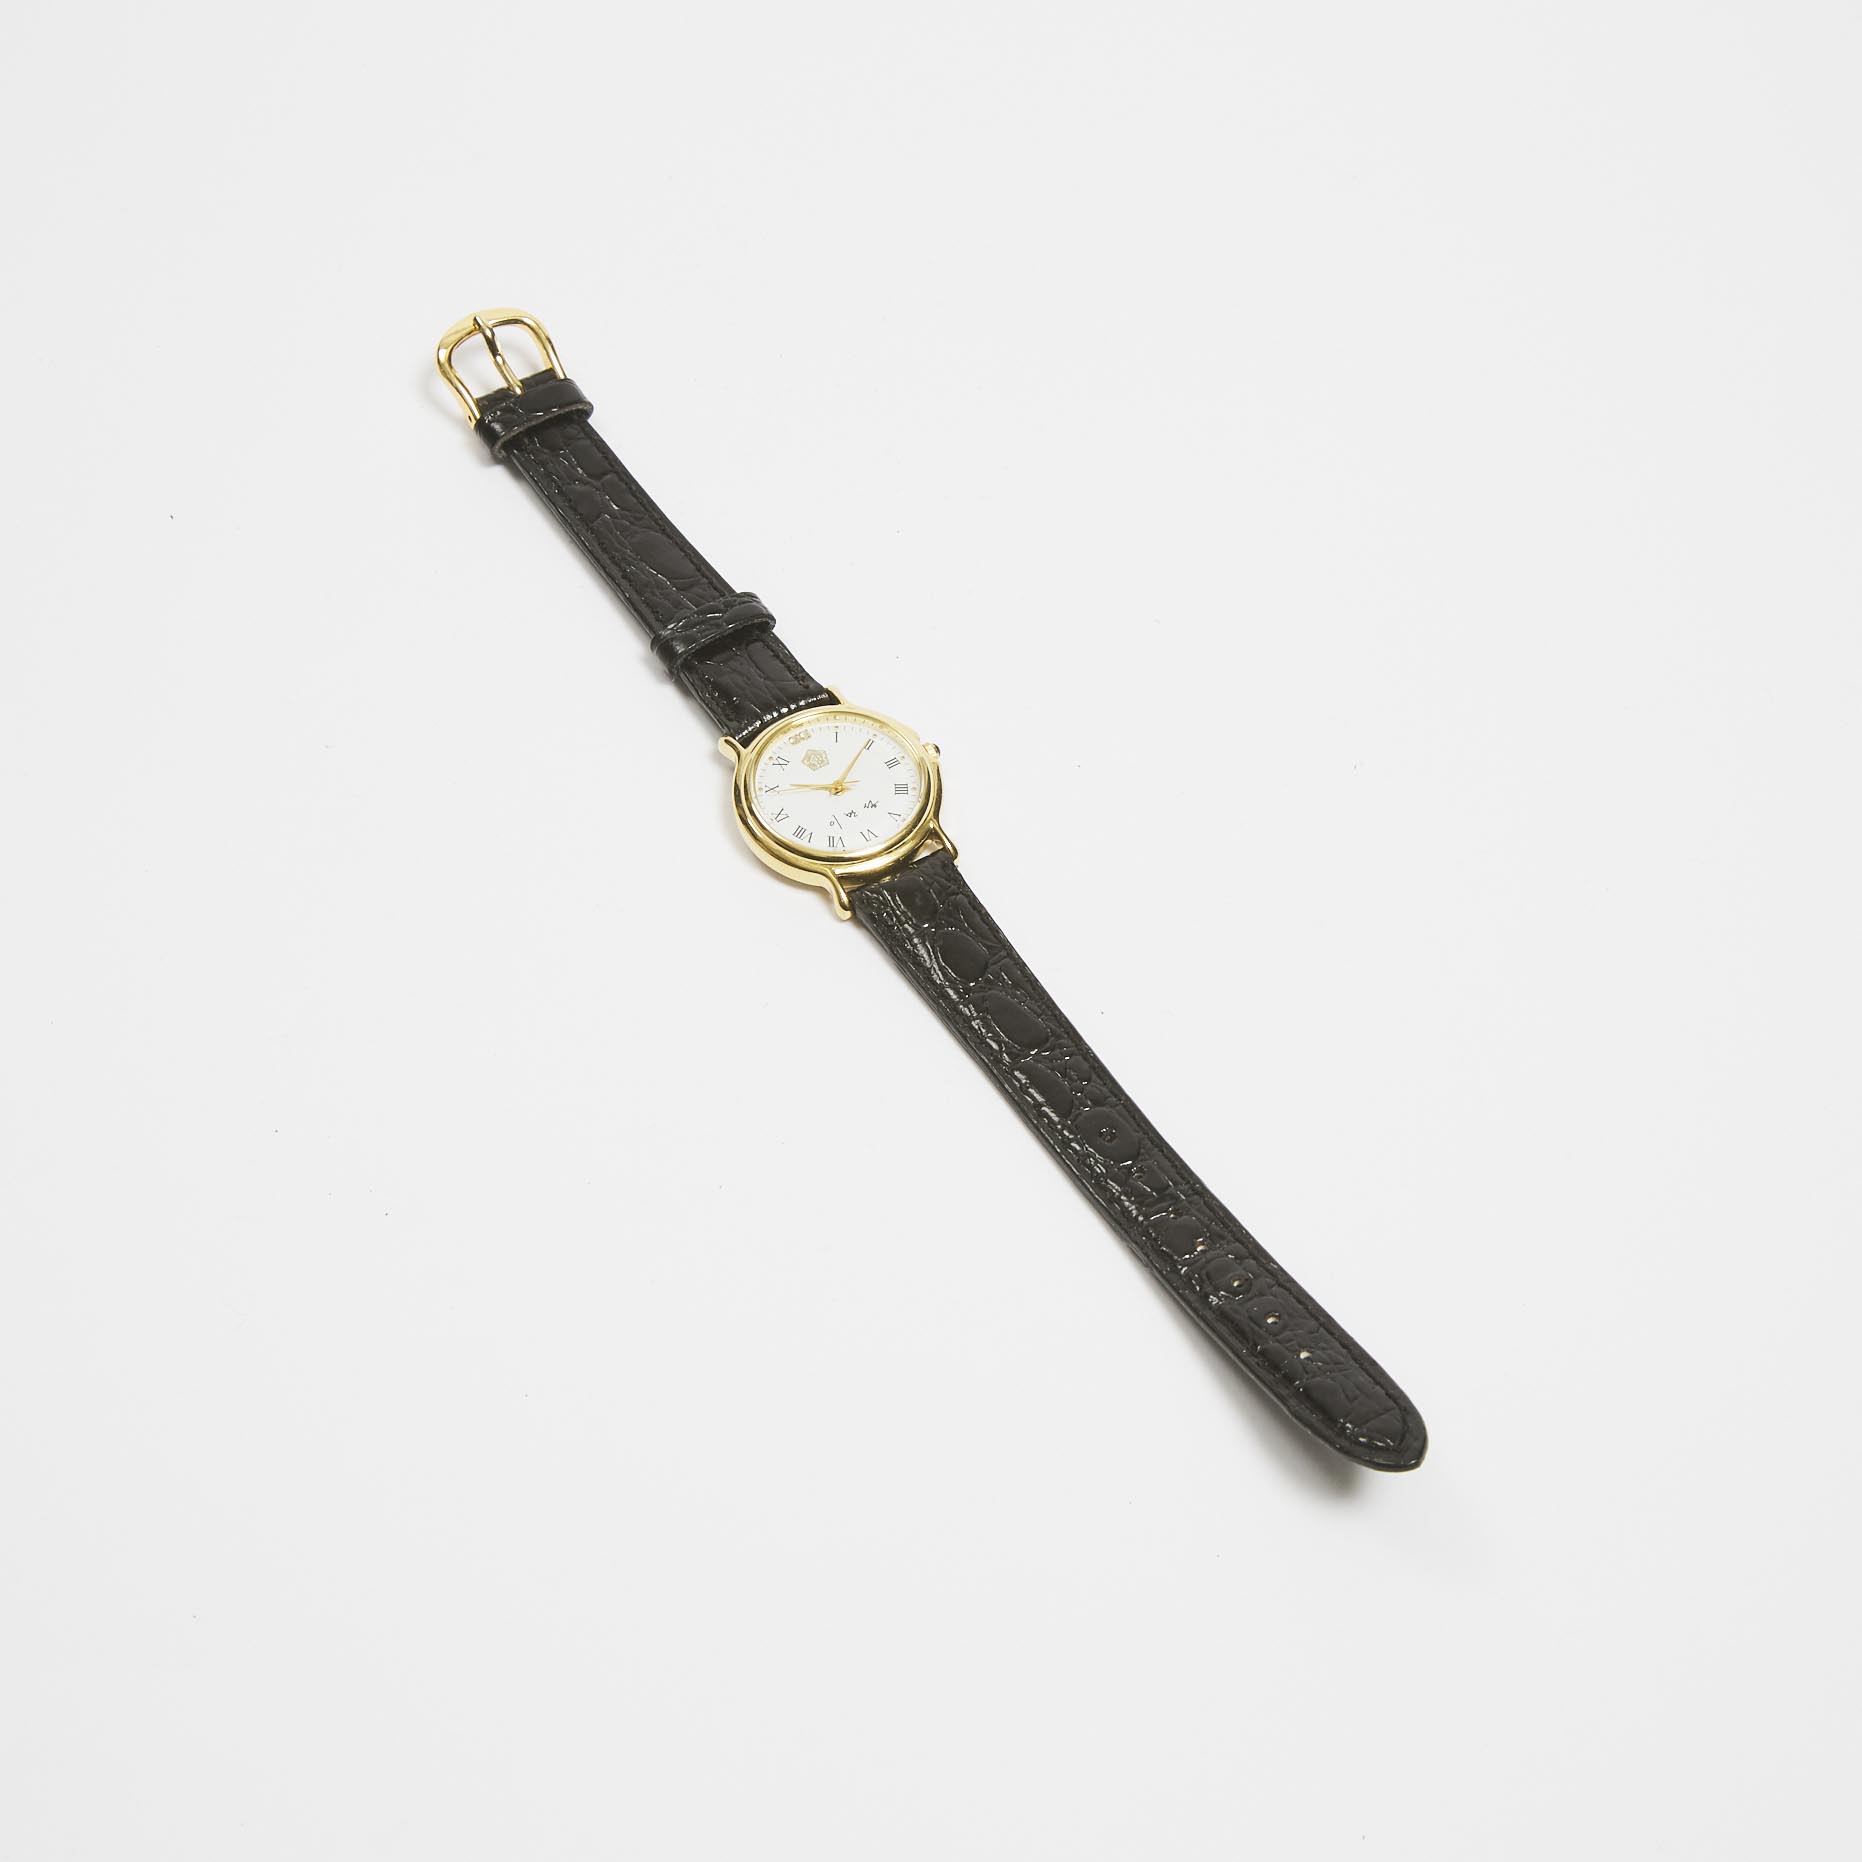 A Korean Wristwatch, With the Former